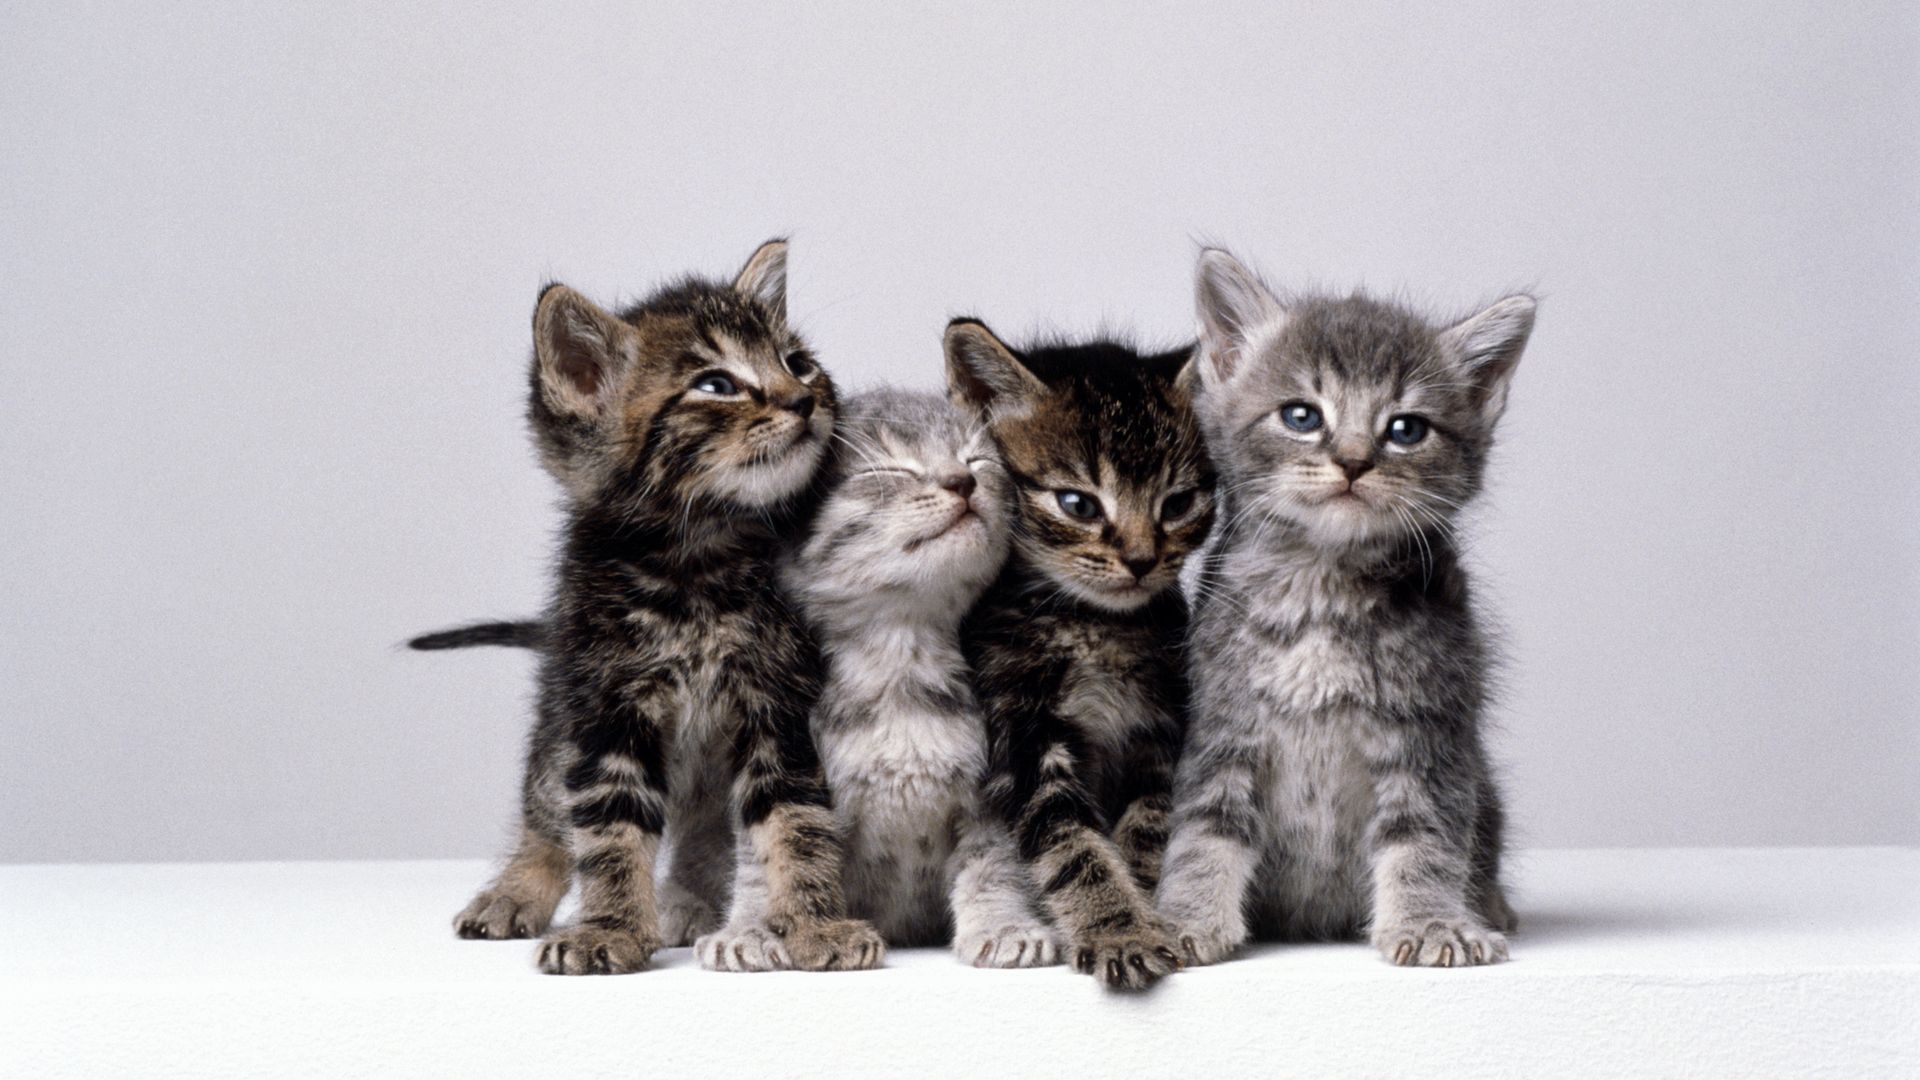 <p>                     Even if you’re “not a cat person”, you’d need a strong will to meet a litter of kittens and not want to take one home. So what stimulates this cute reflex? Studies show that we seek out the tactile sensation of their soft fur, as well as being neurologically wired to want to nurture baby animals.                   </p>